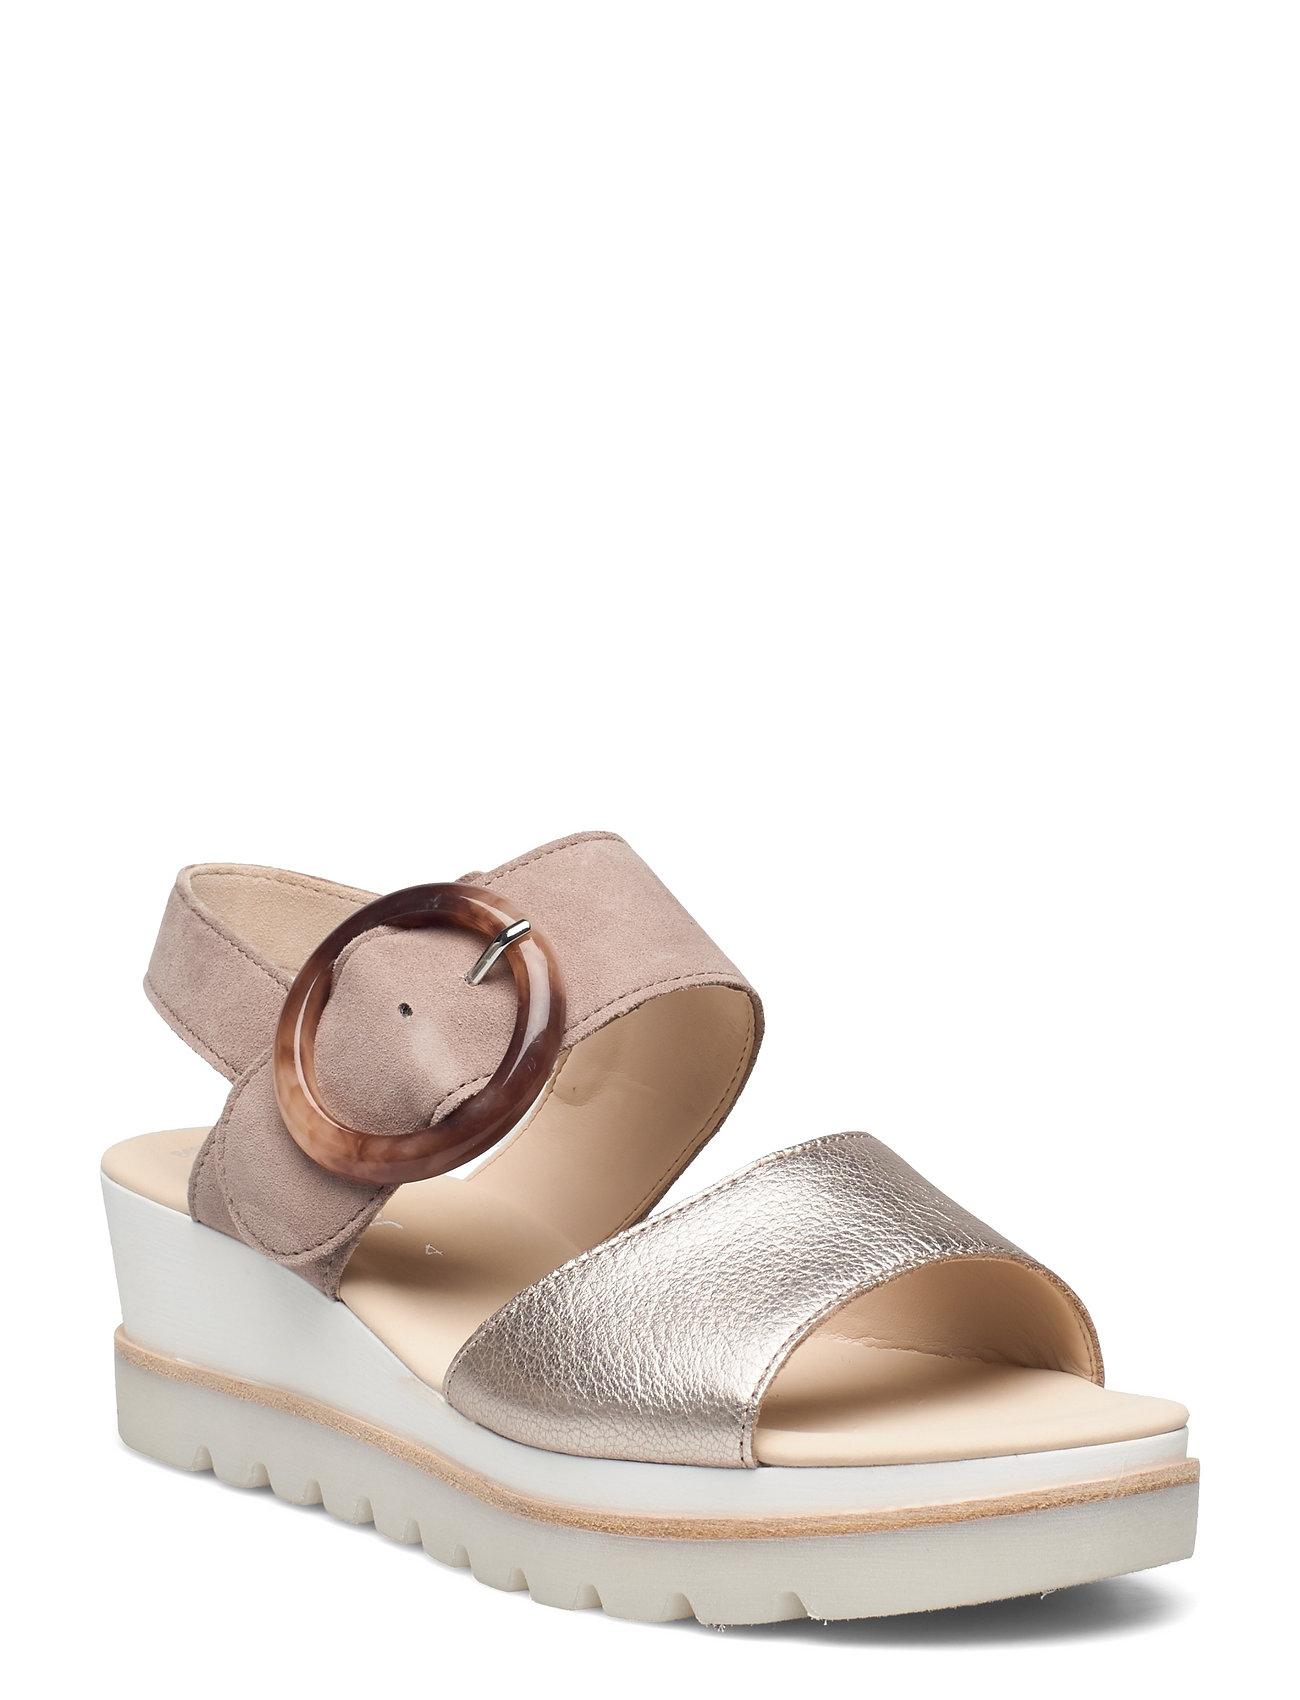 Aas Wie puree Gabor Wedge Sandal (Beige), (69.99 €) | Large selection of outlet-styles |  Booztlet.com